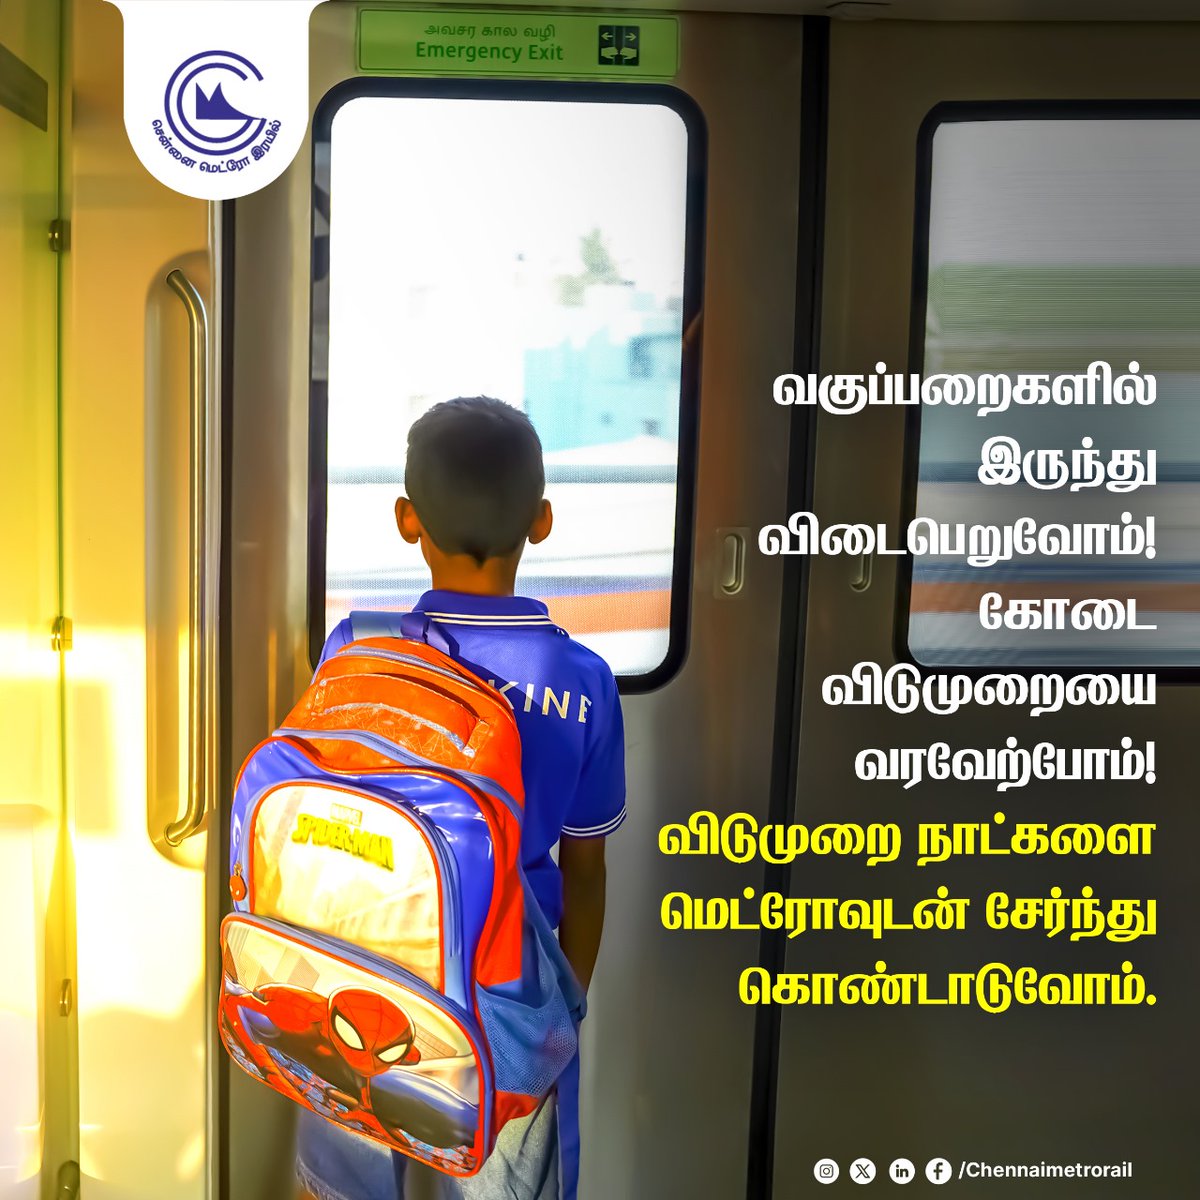 Beat the heat and explore #Chennai effortlessly! Hop on the #Chennaimetro for a cool and convenient #travel experience. #summertravel #cmrl #metrorail #summervacation #commute